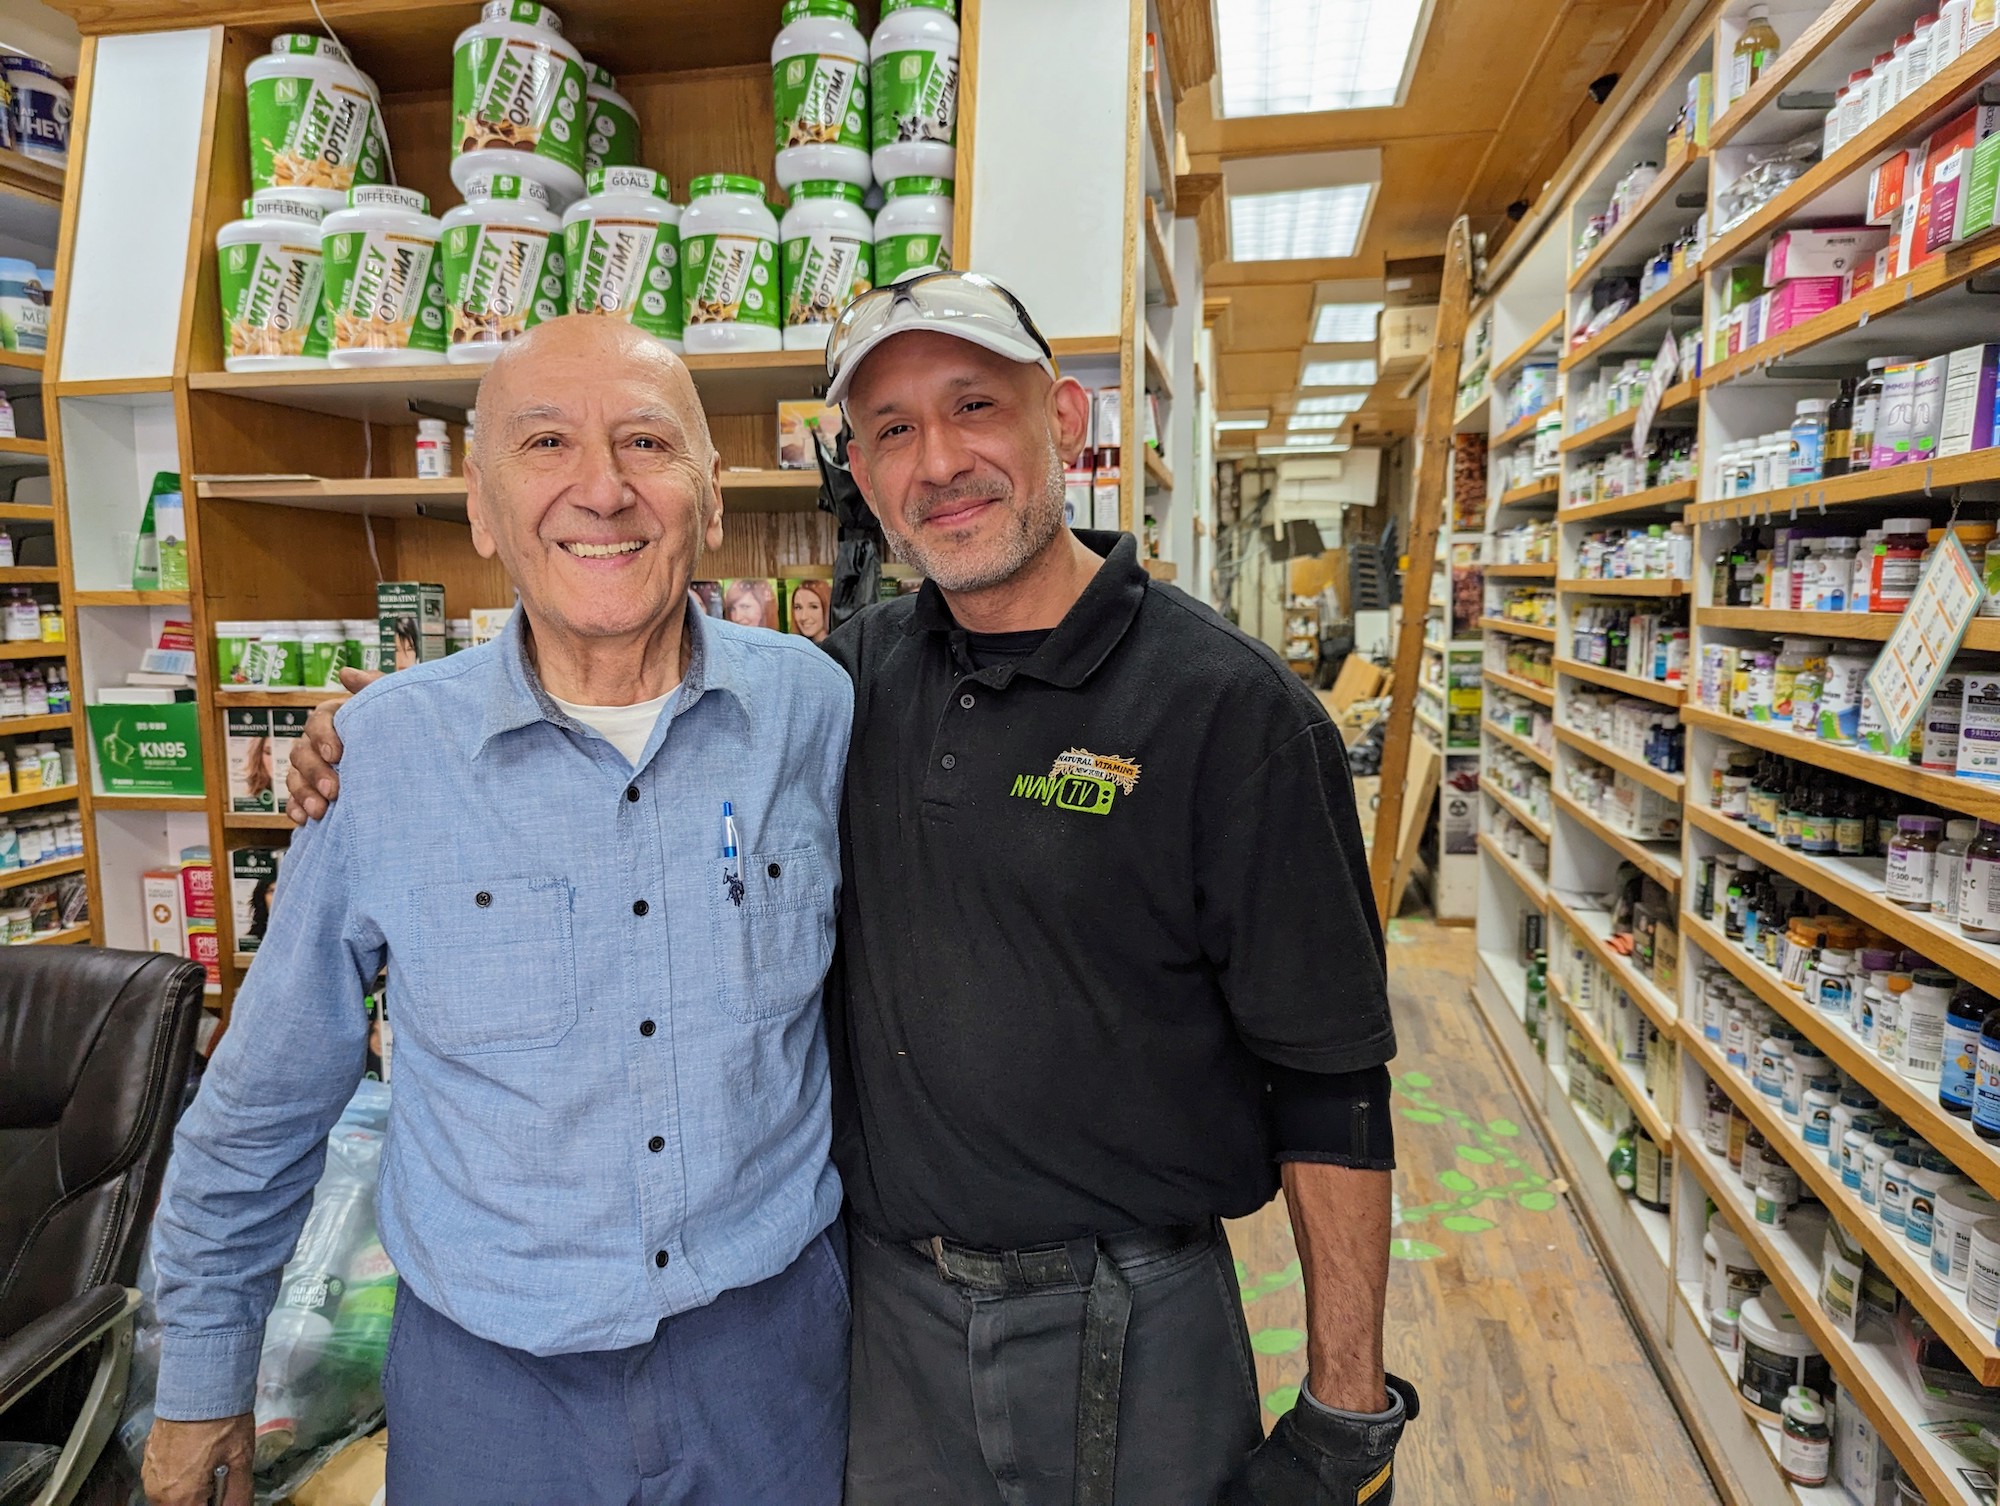 Natural Vitamins is closing in Greenpoint after 50 years - Greenpointers